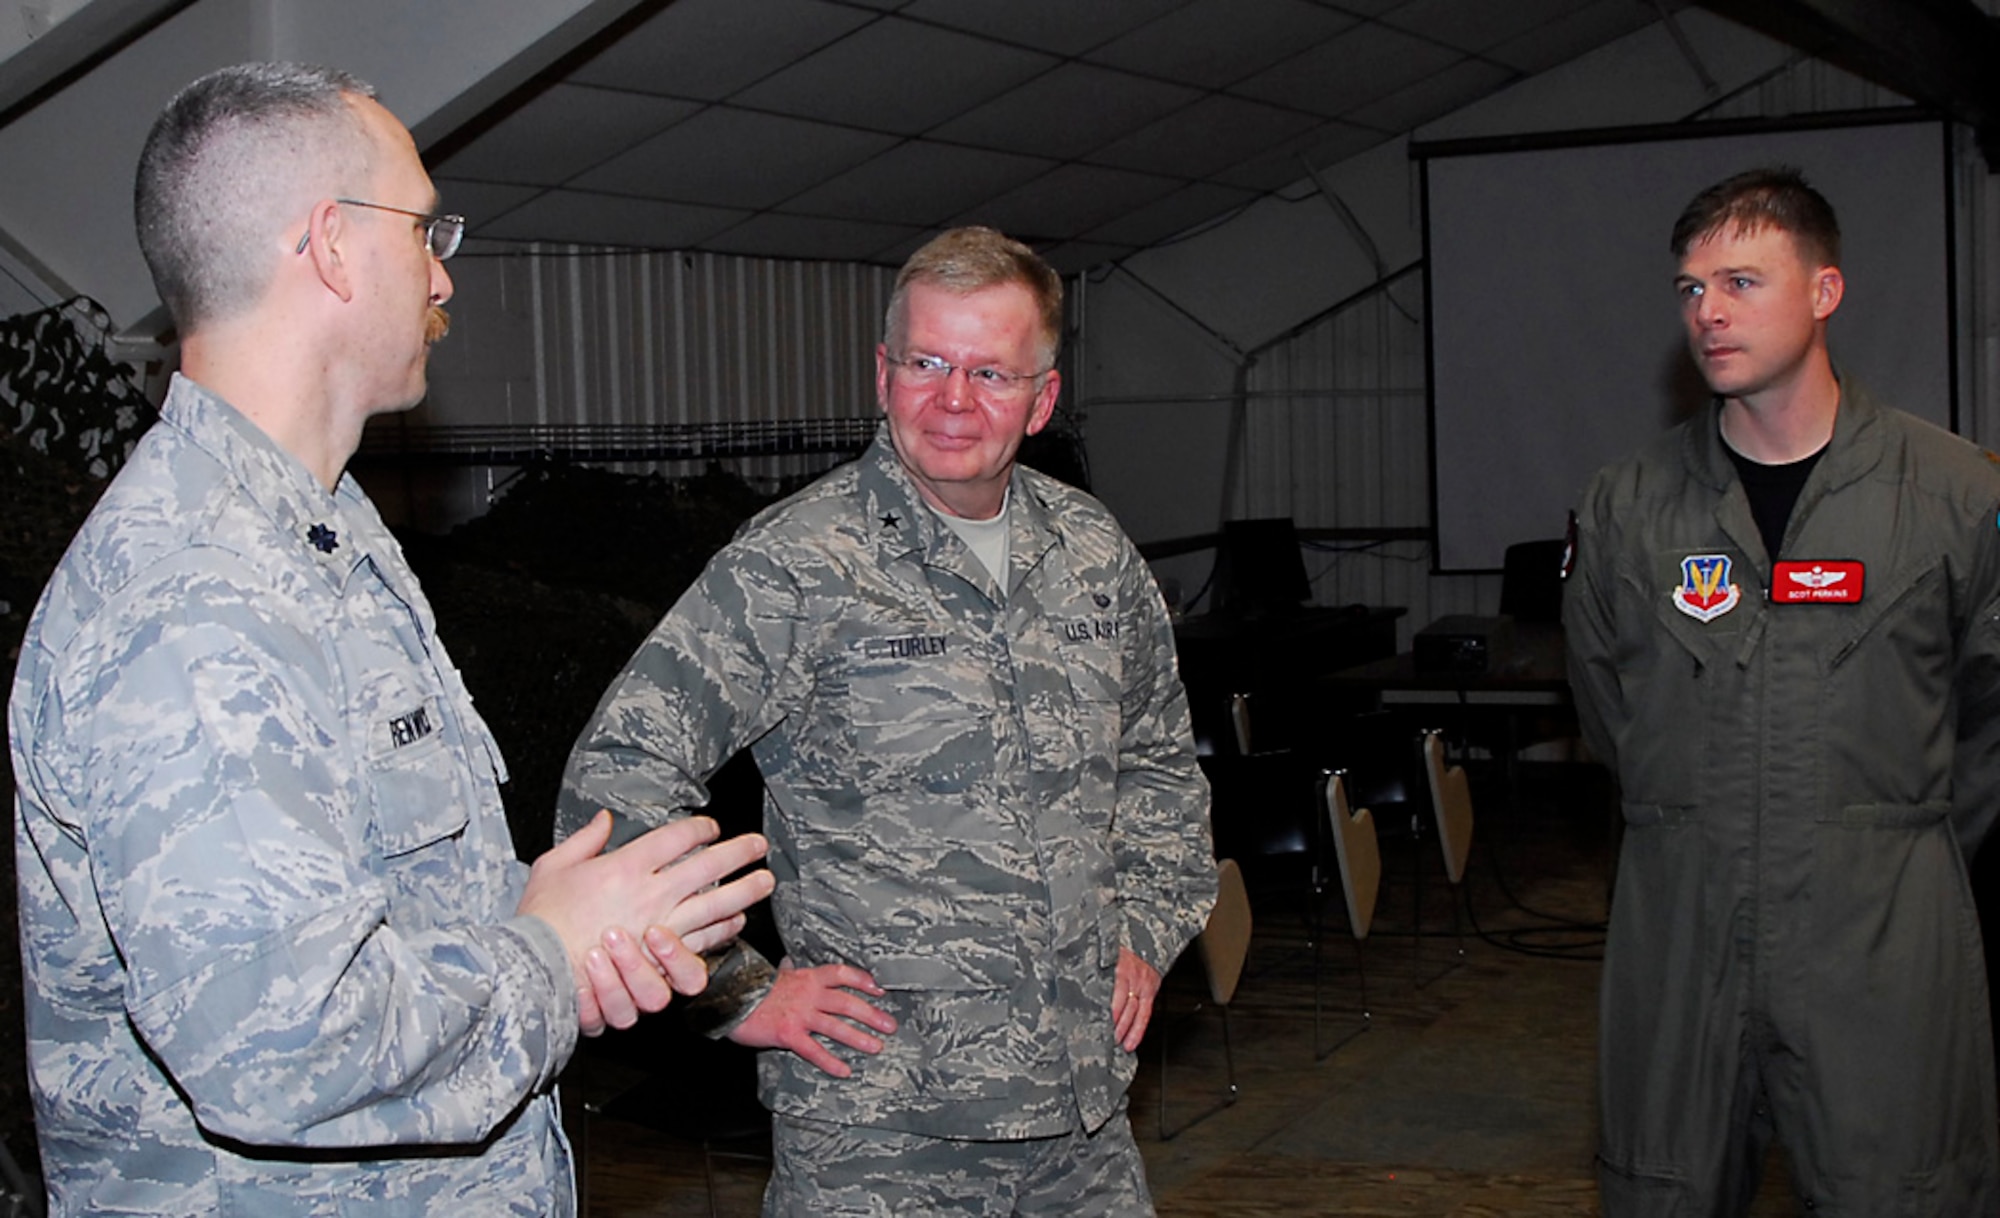 (L to R) Lt. Col. Patrick Renwick, 113th ASOS commander; Brig. Gen. F. Andrew Turley, Air National Guard Assistant to the Command Staff Judge Advocate; Maj. Scot Perkins, Air Liaison Officer